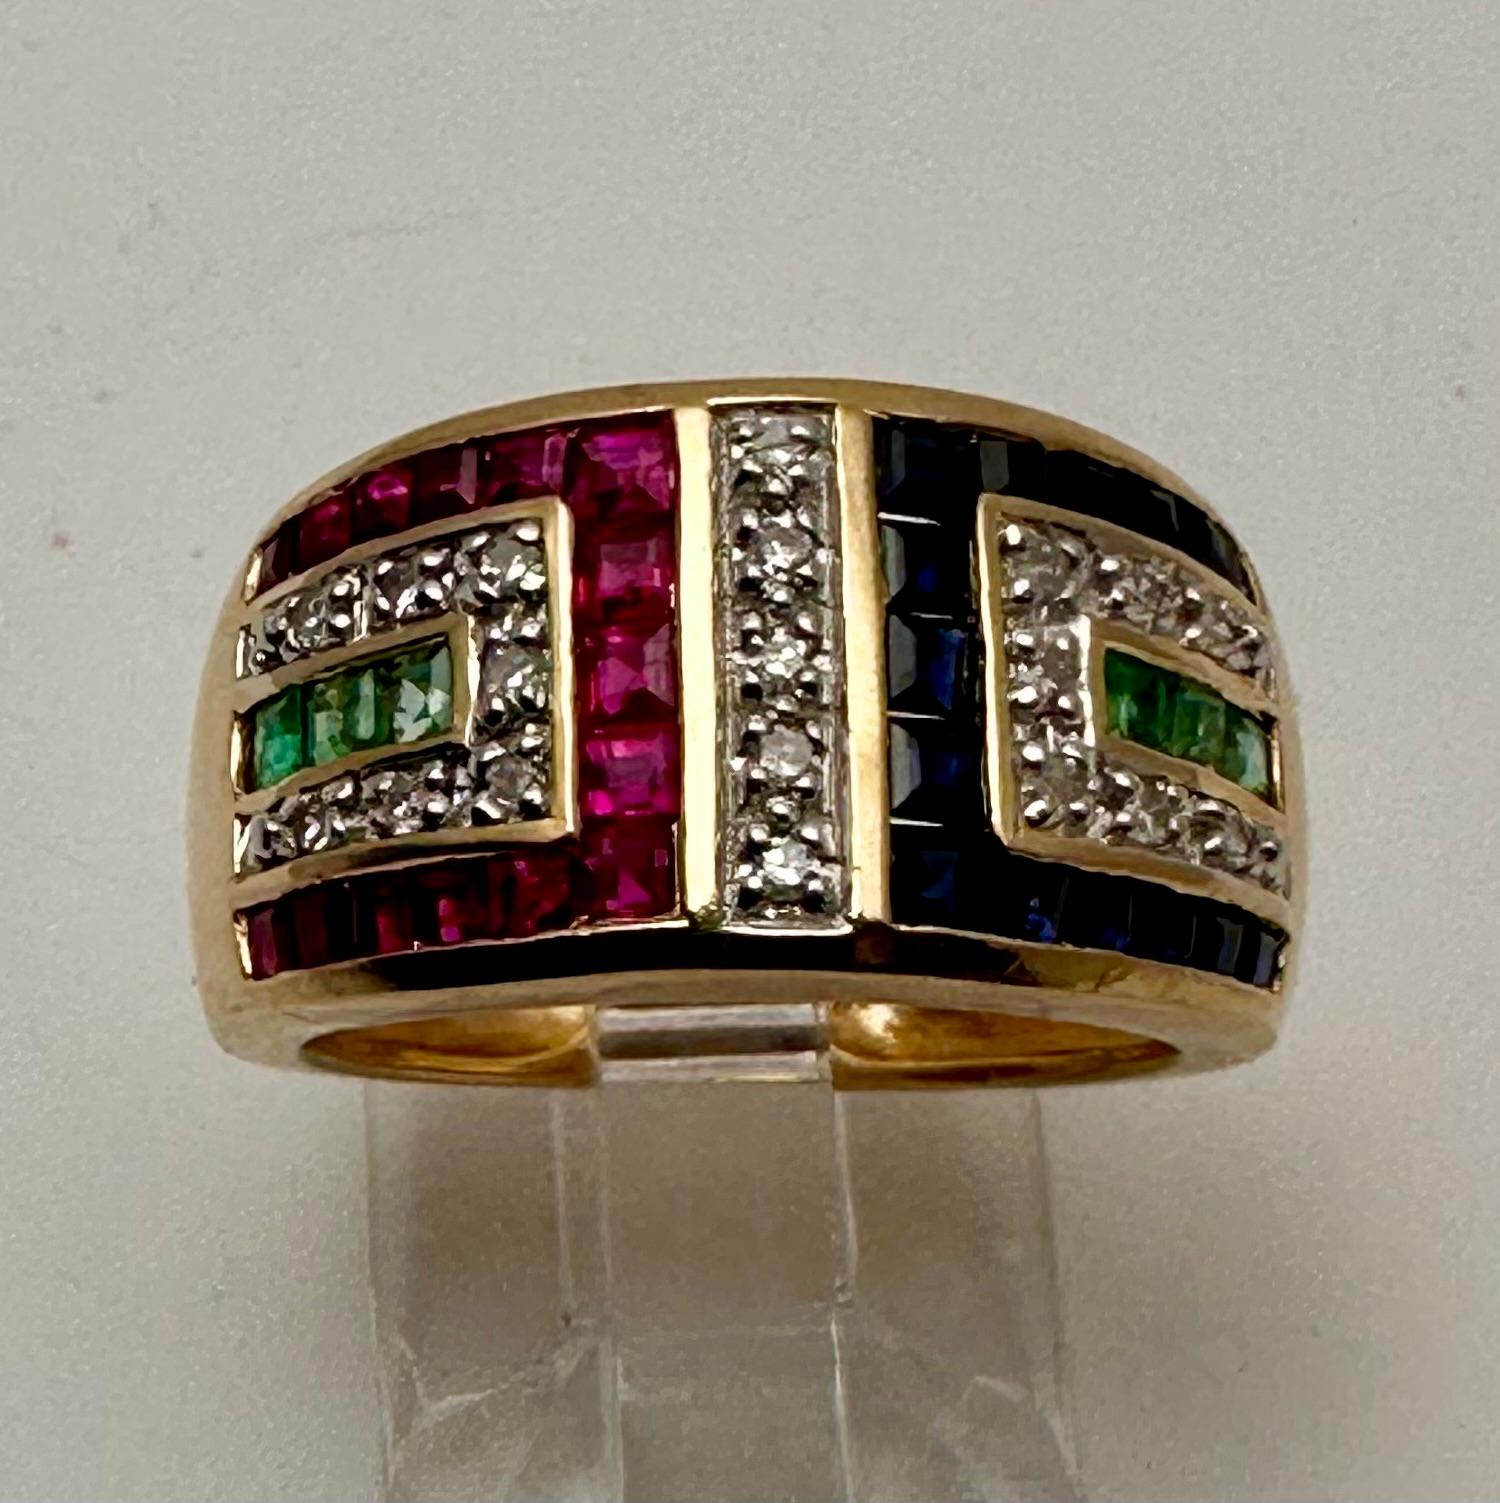 14k Yellow Gold 10.5 mm Wide Ruby Sapphire Diamond and Emerald Ring Size 7. Colored stones are princess cut and round diamonds.
RUBY
This vibrant, gem-like baby name is often associated with wealth, health, passion, and success in love, and derives